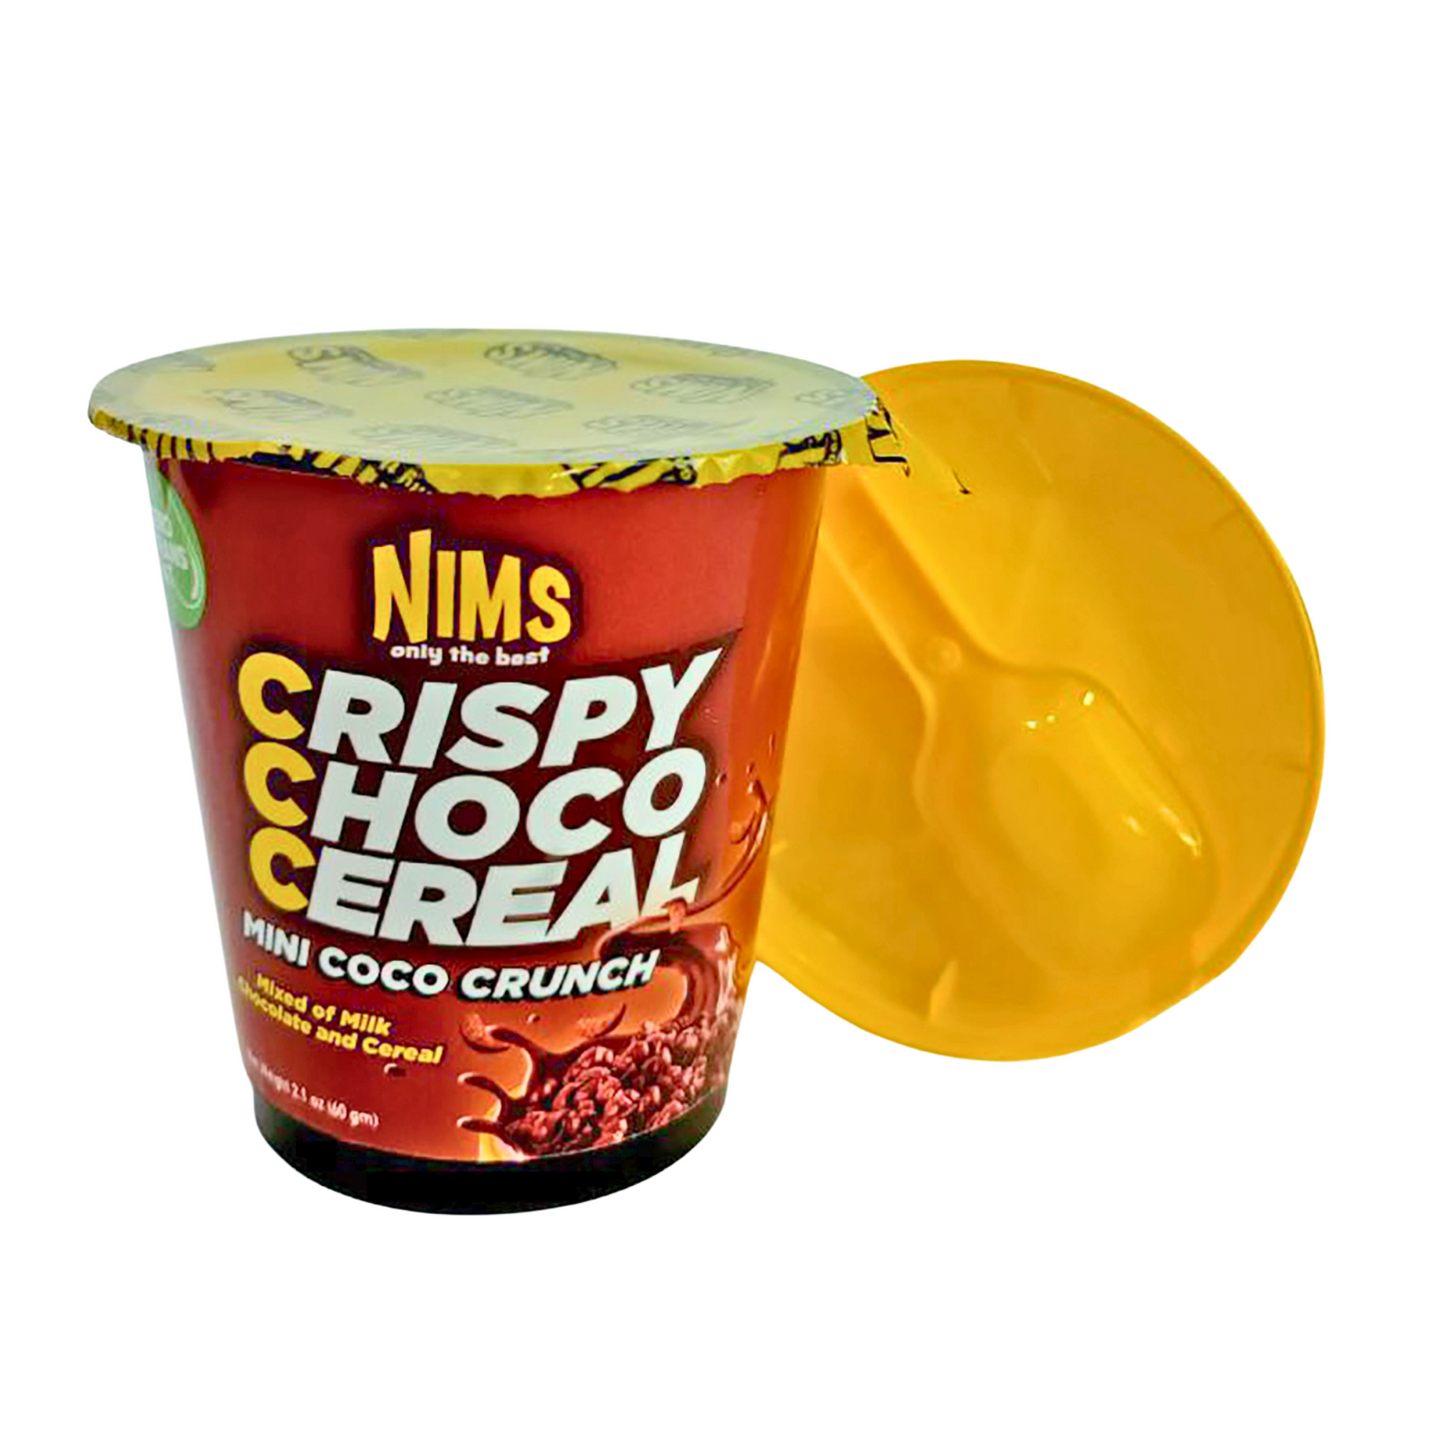 NIMS Crispy Choco Cereal, Milk Chocolate Cereal, Mixed of Milk, Chocolate and Cereal, Ready to Eat, 2.1 oz (60 gm), a pack of 12